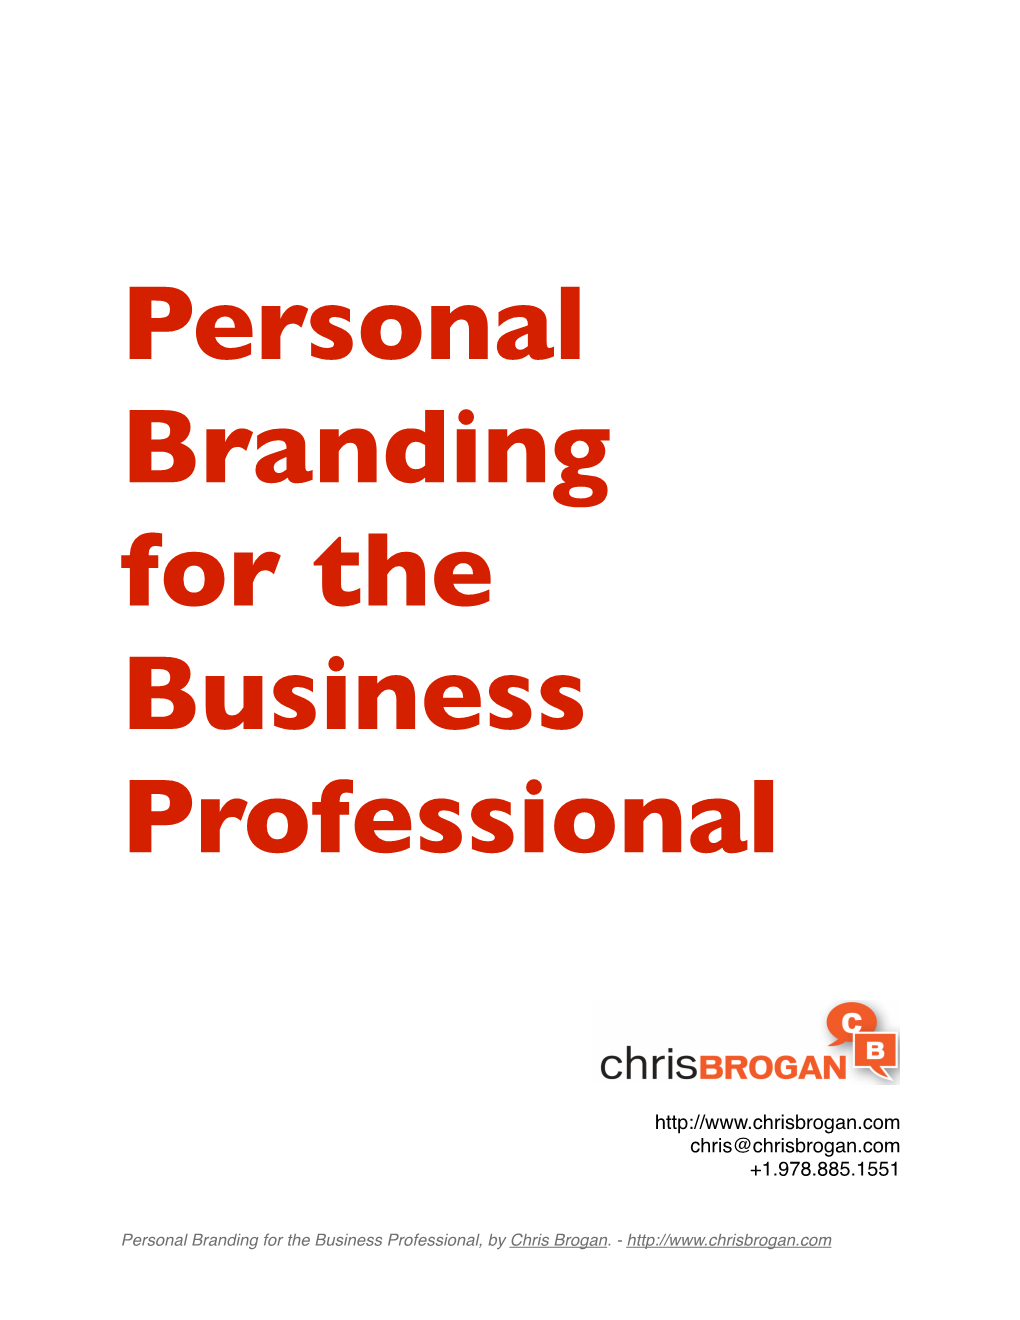 Personal Branding for the Business Professional